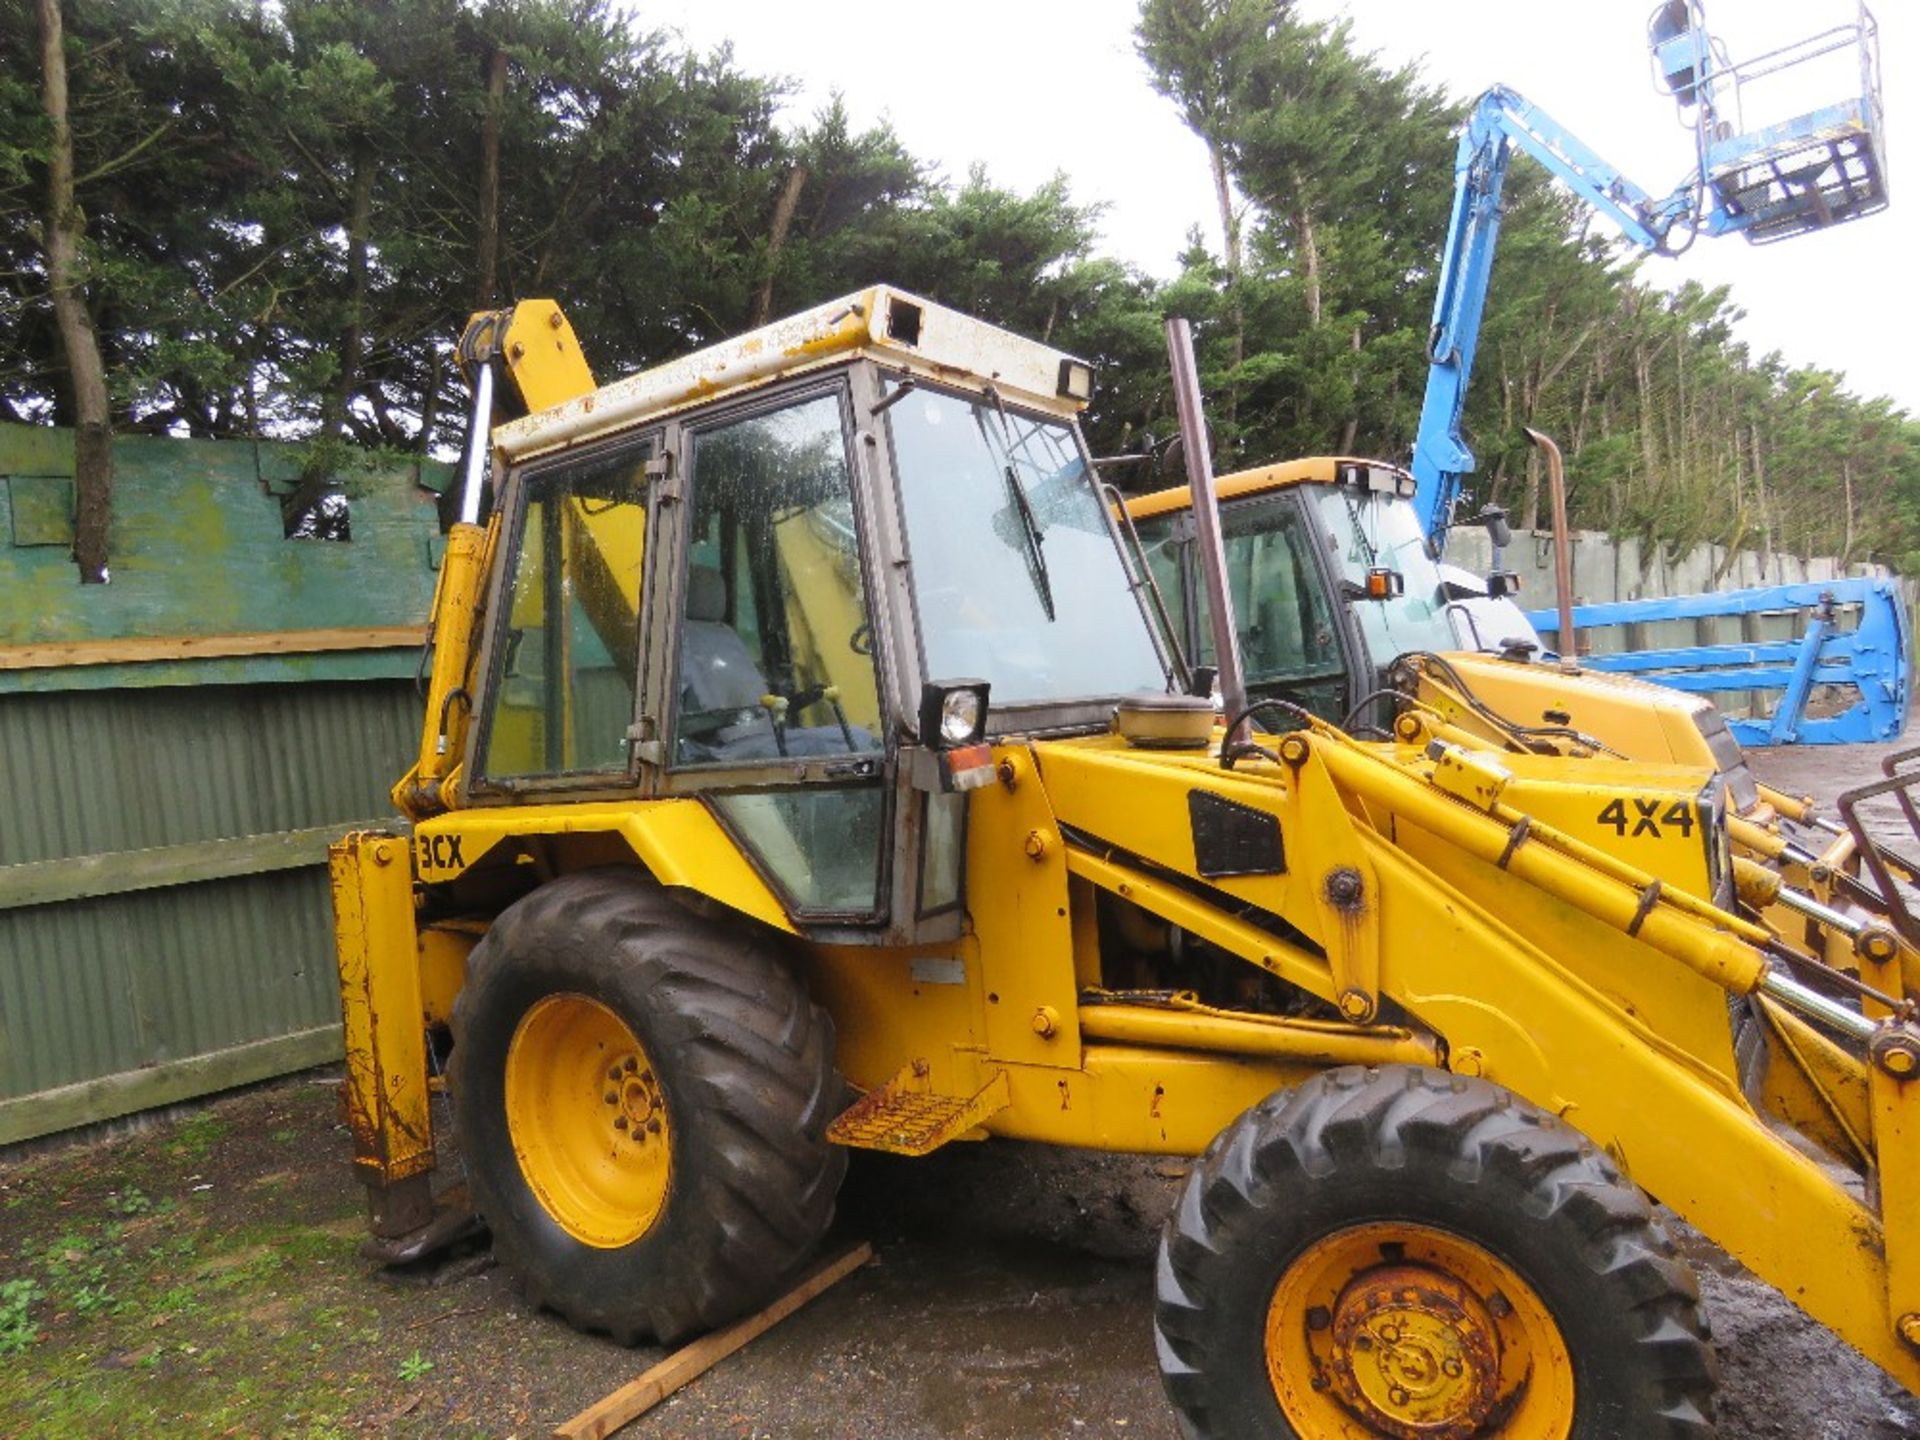 JCB 3CX SITEMASTER BACKHOE LOADER REG:F539 SDE. TYPE 3CX-4/34 SN:509602.F. WITH 4 IN 1 BUCKET PLUS - Image 2 of 7